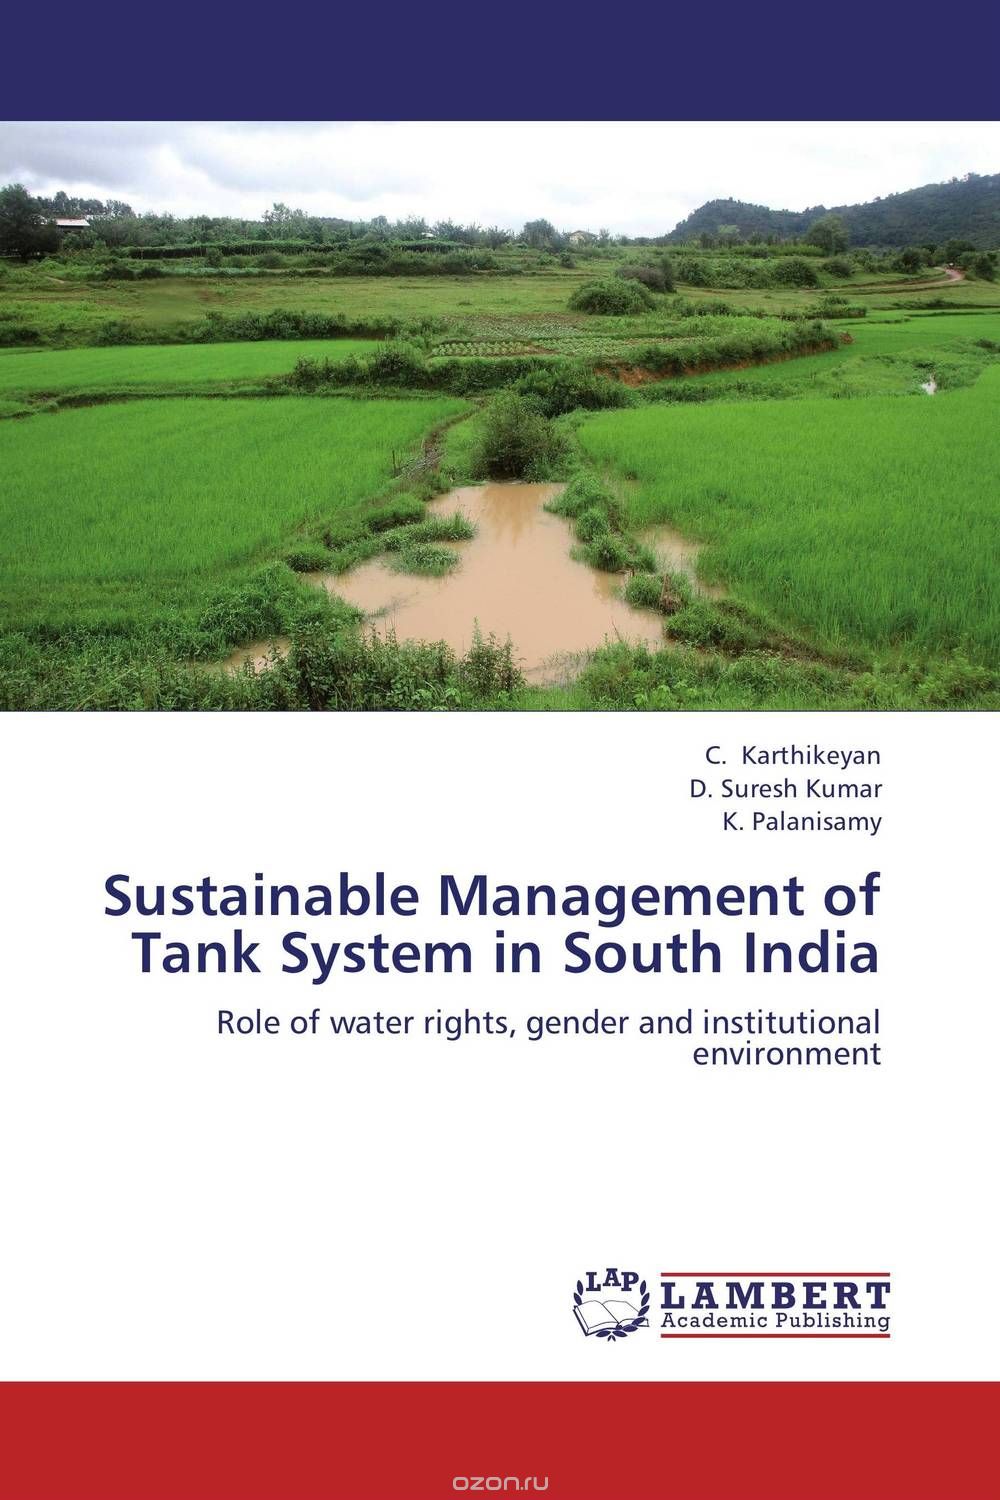 Скачать книгу "Sustainable Management of Tank System in South India"